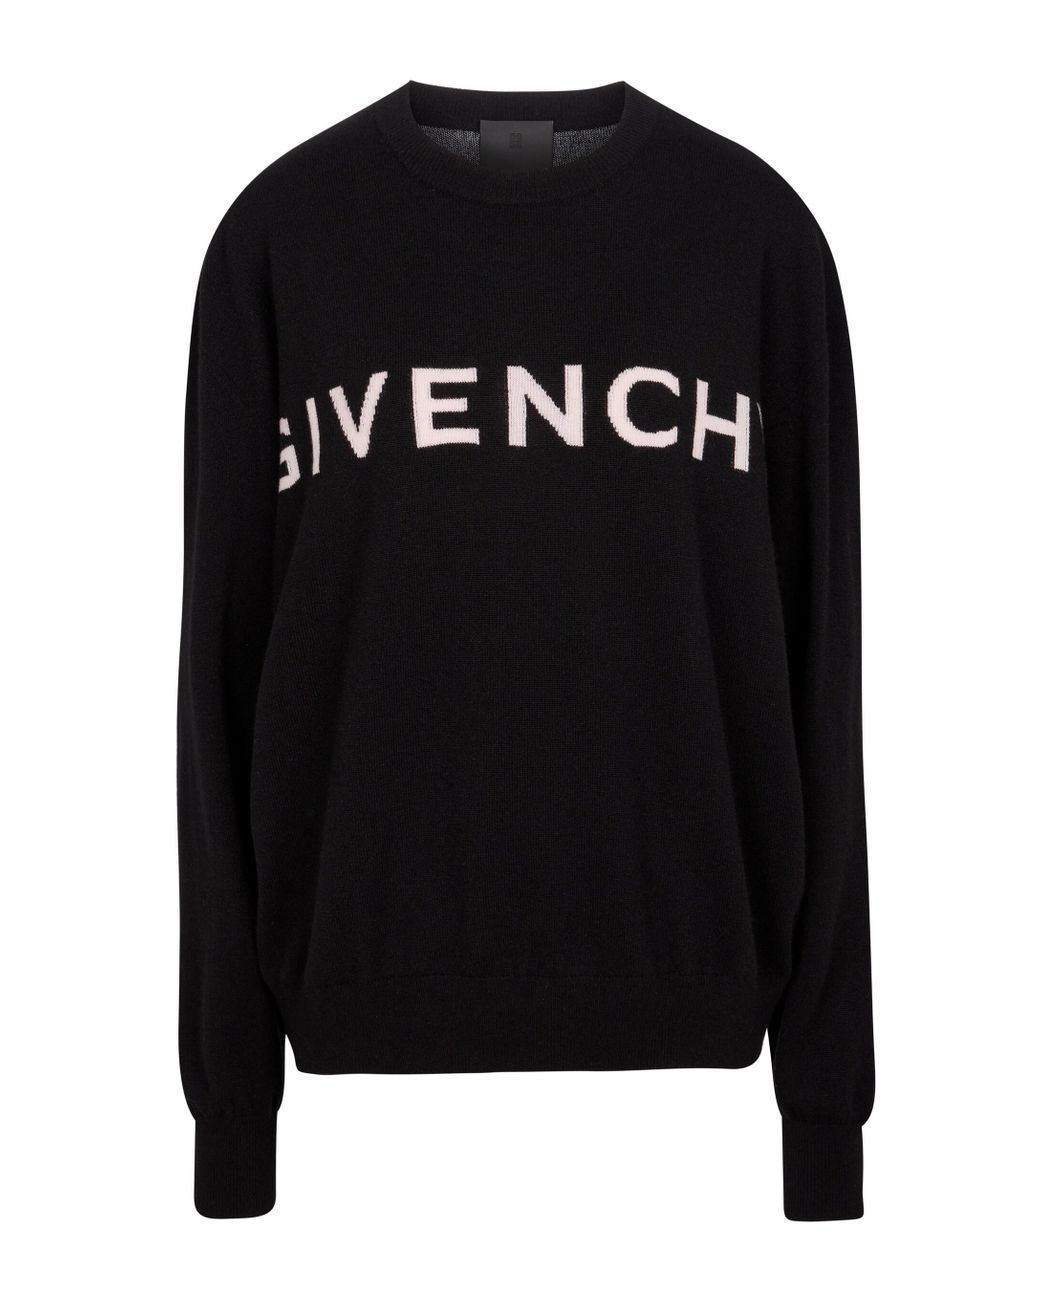 Givenchy 4g Intarsia Cashmere Sweater in Black - Lyst